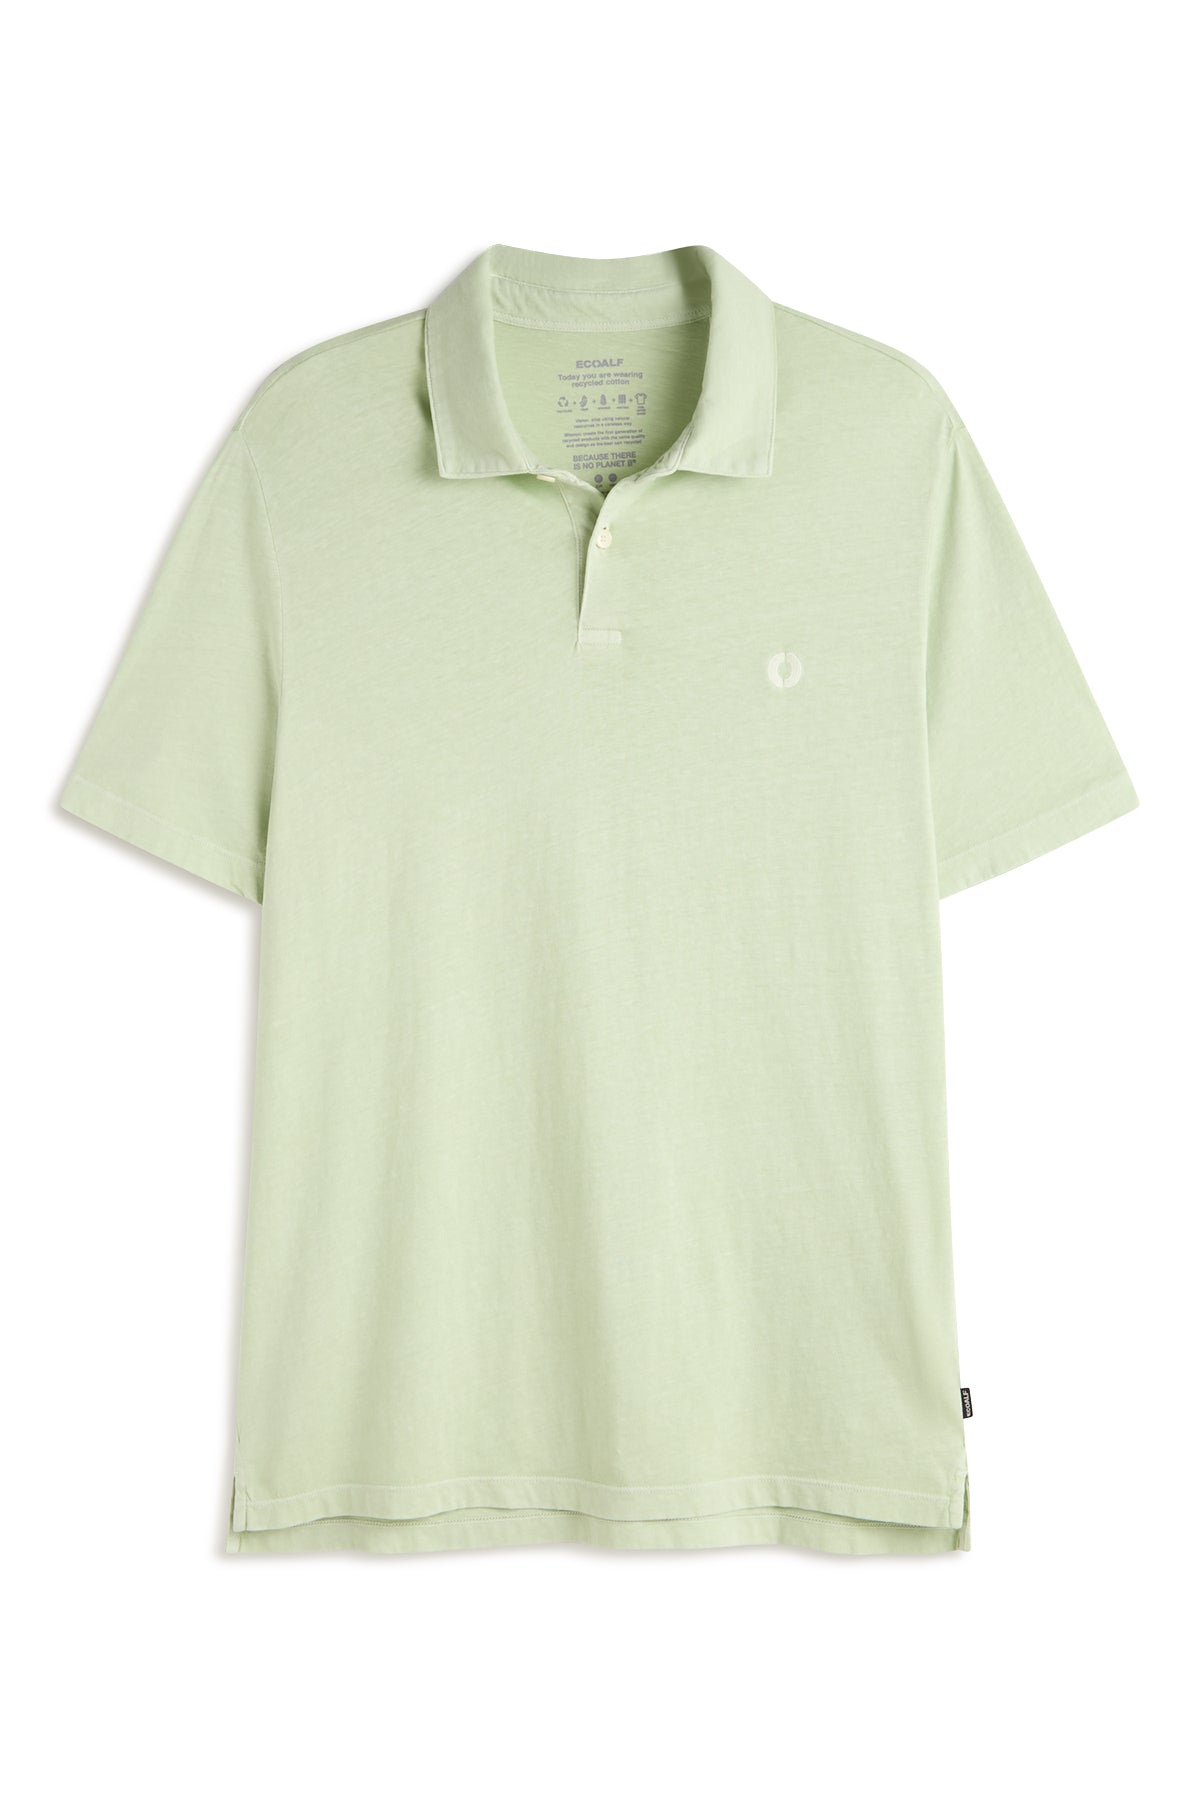 POLO IN JERSEY THEO VERDE MENTA